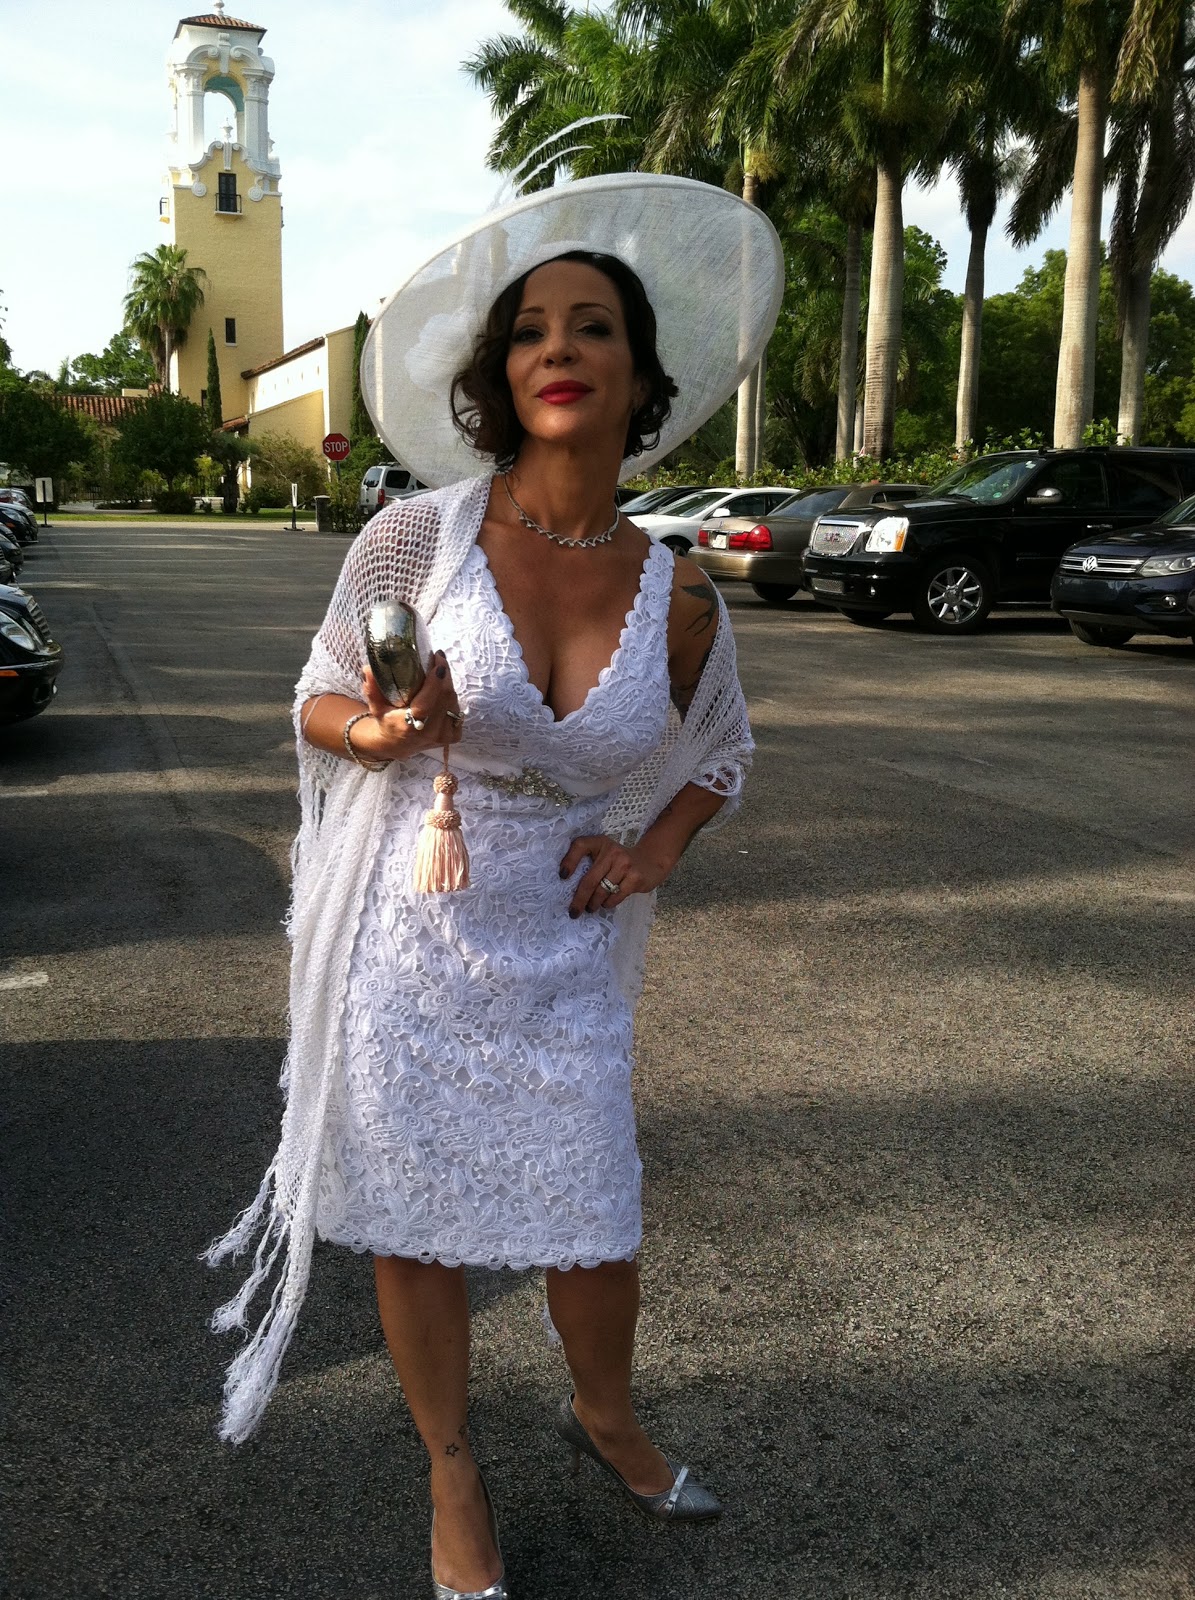 COUGAR VINTAGE: Celebrity Wedding!! The Real Housewife of Miami!